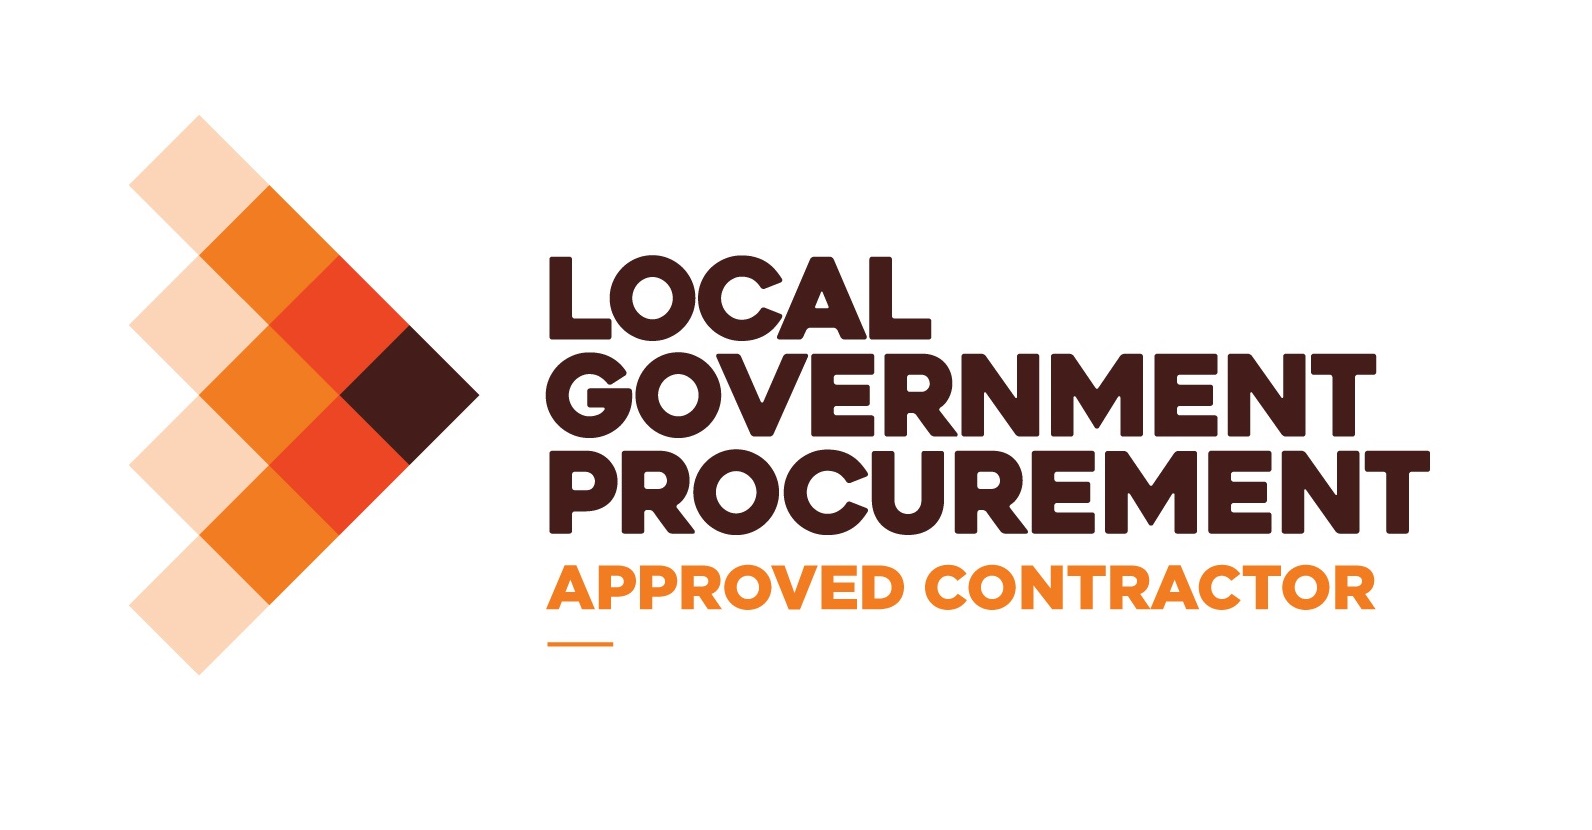 Local Government Procurement Approved Contractor logo